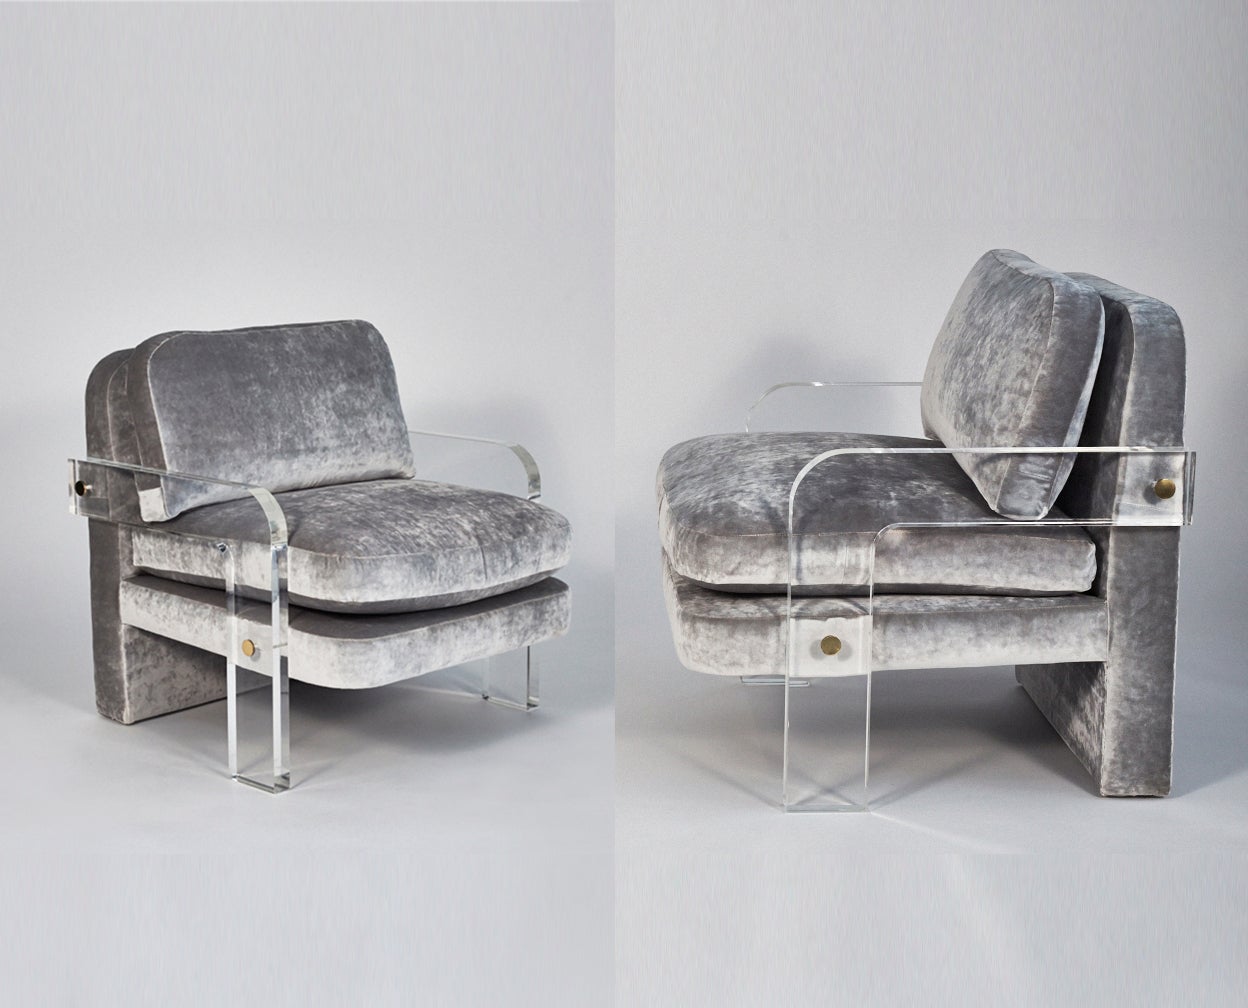 A pair of vintage Vladimir Kagan lounge chairs with 1.5